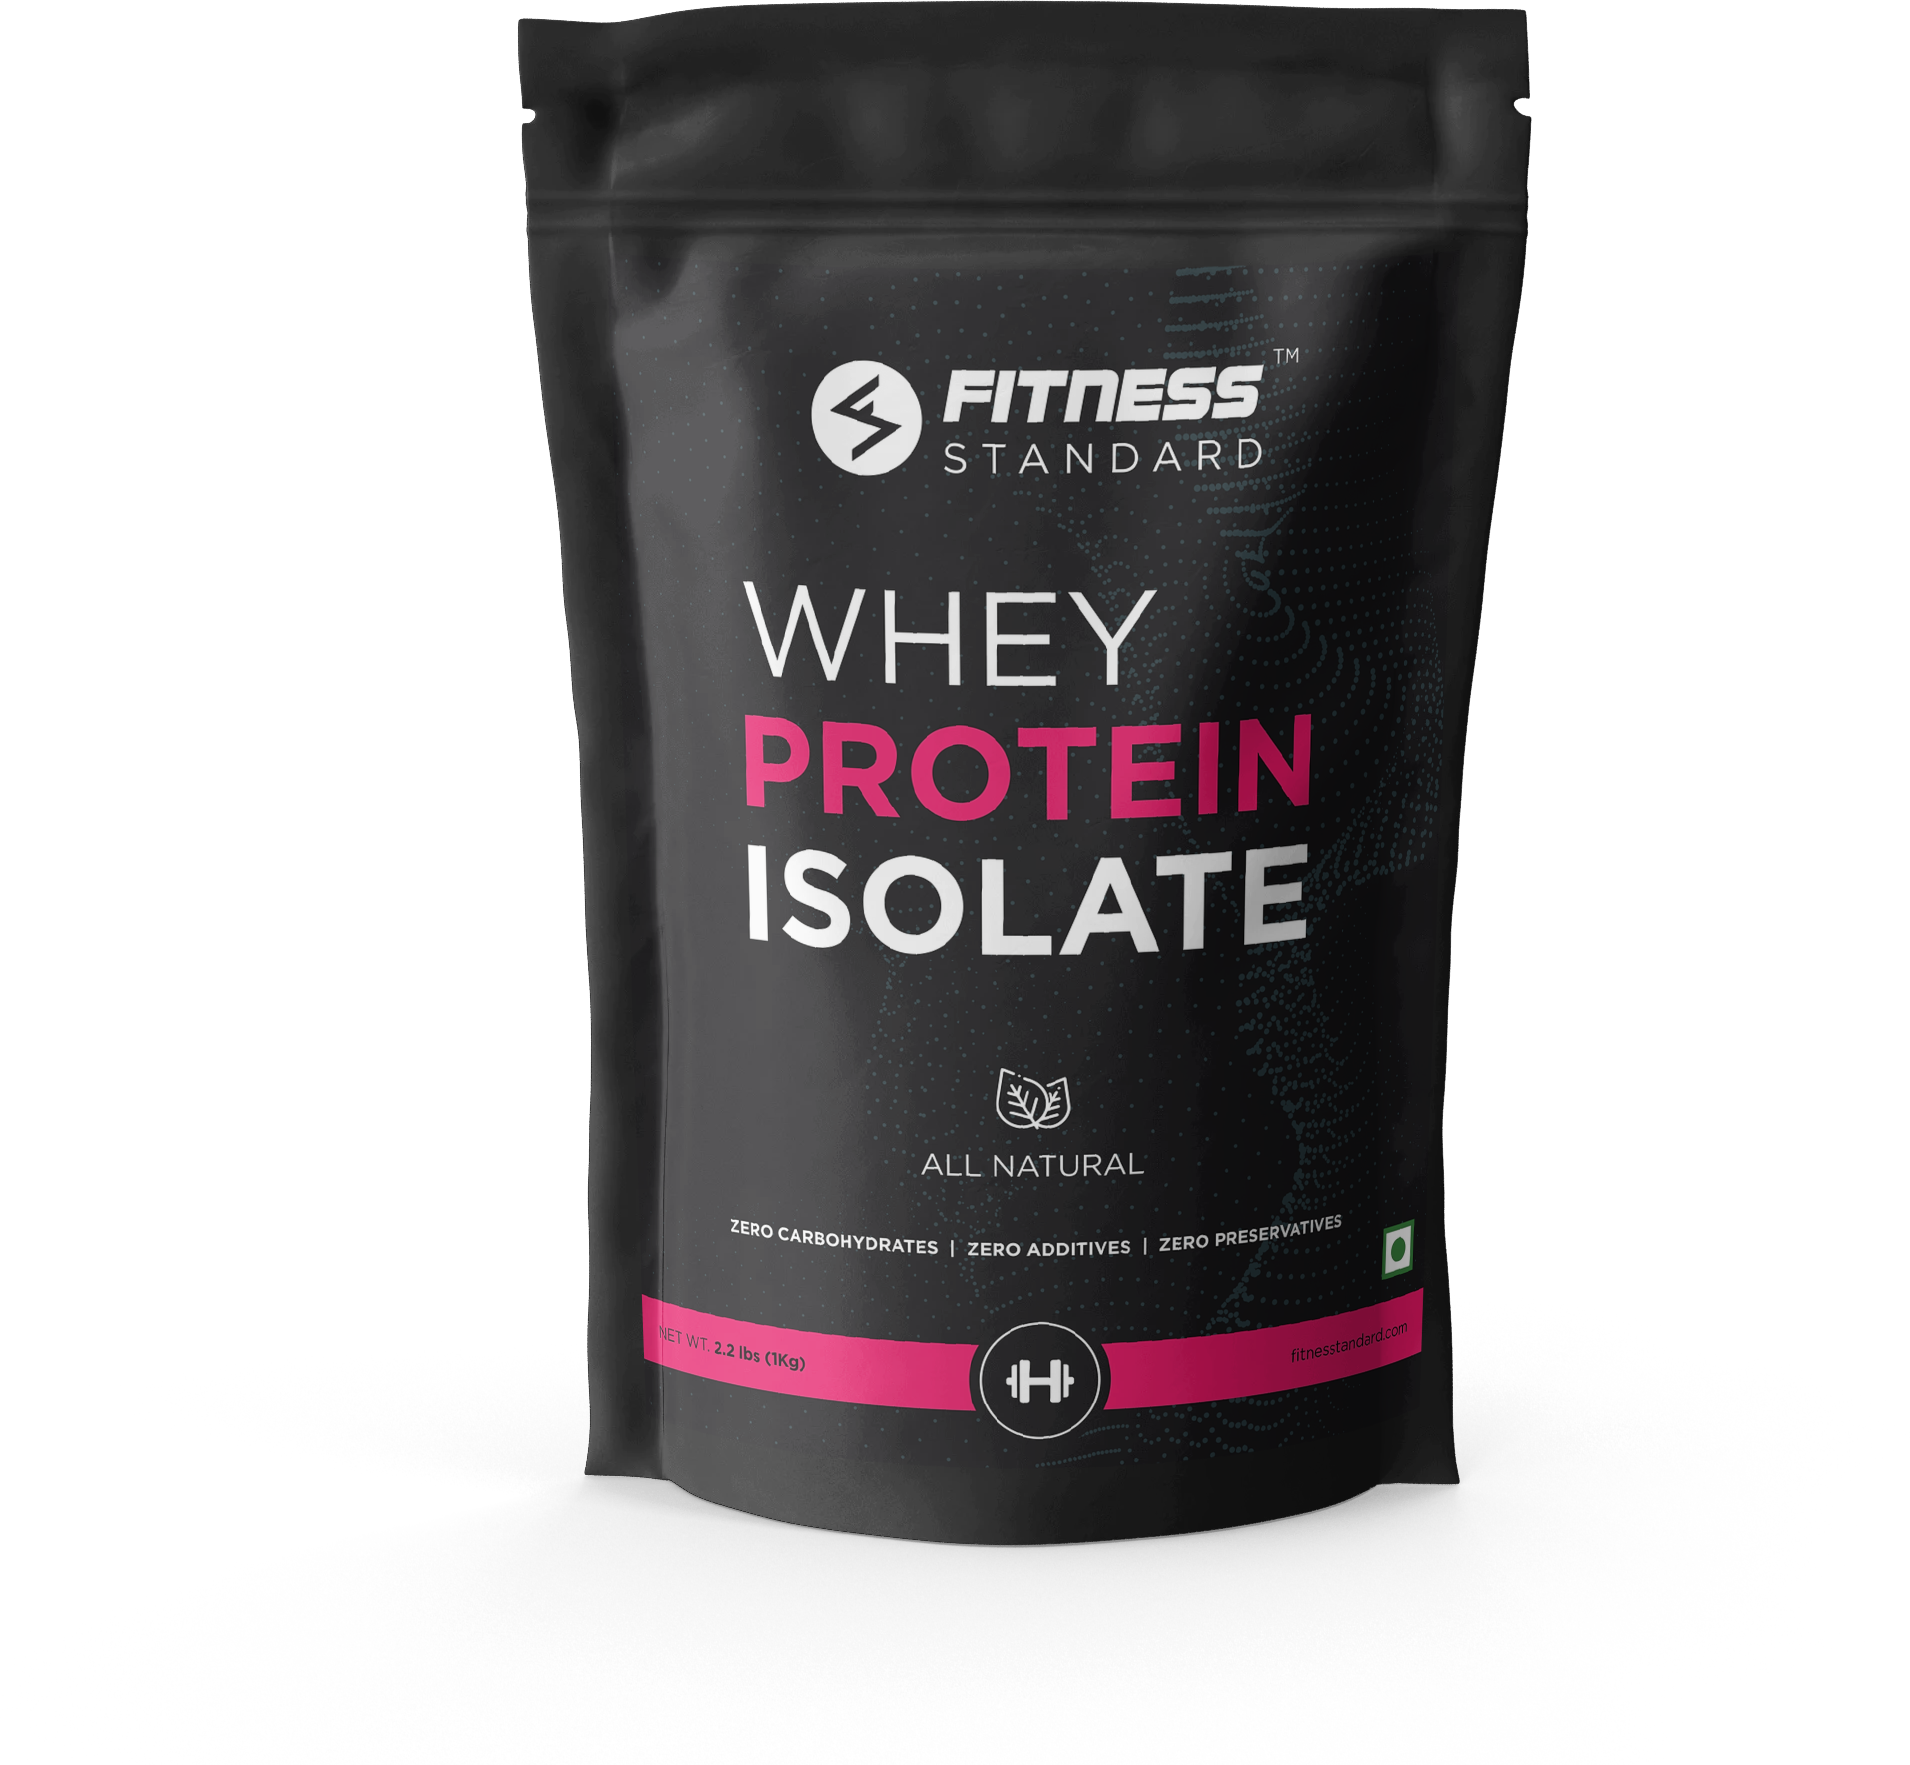 Whey Protein Isolate (Copy)